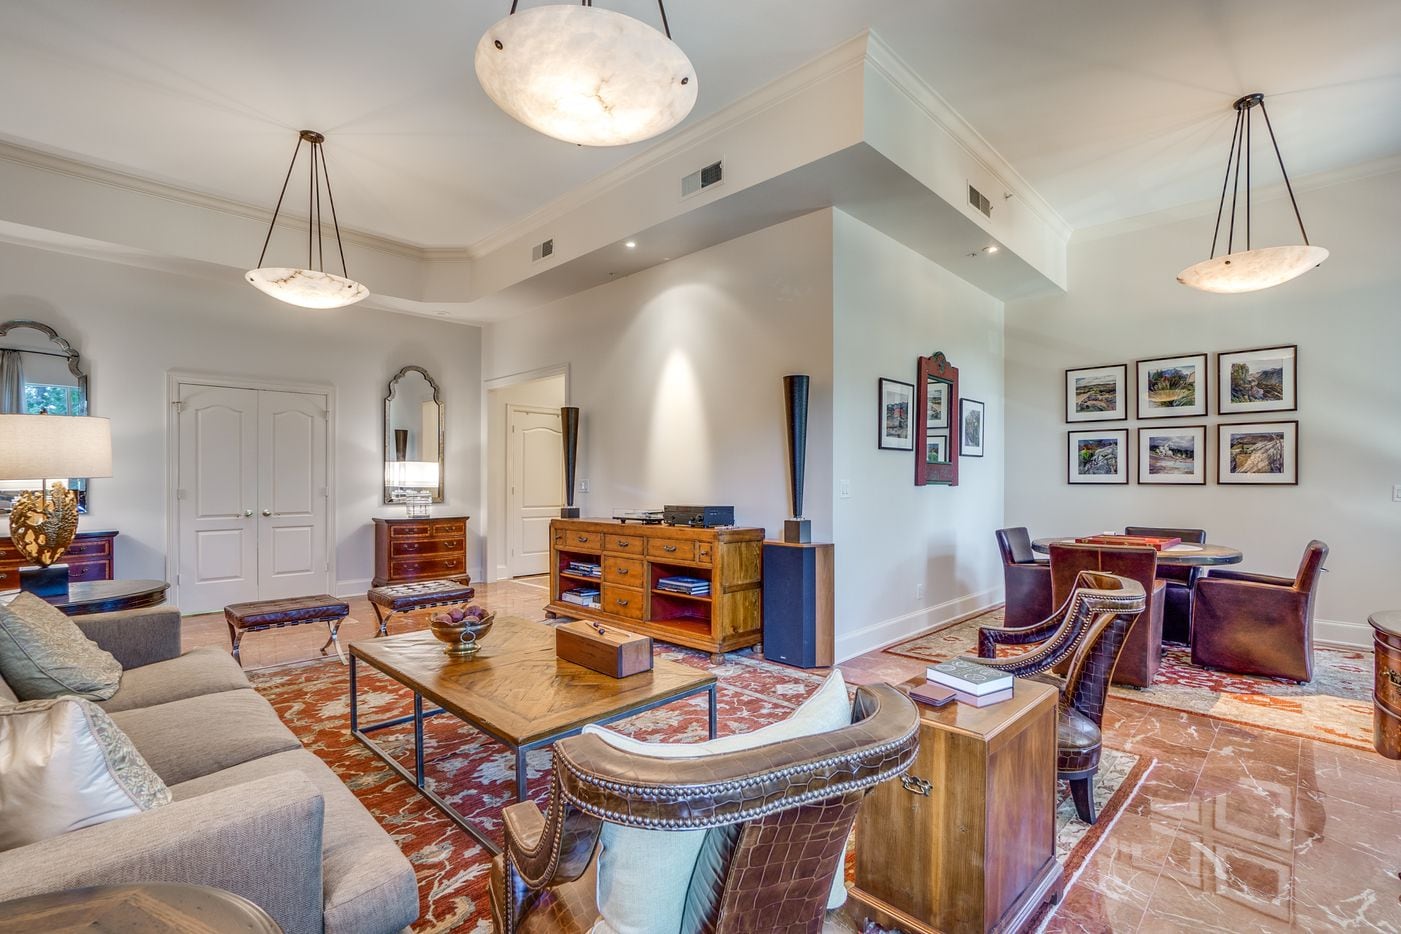 Take a look at the interior of 3401 Lee Parkway, Unit 3A at The Mayfair in Dallas, TX.